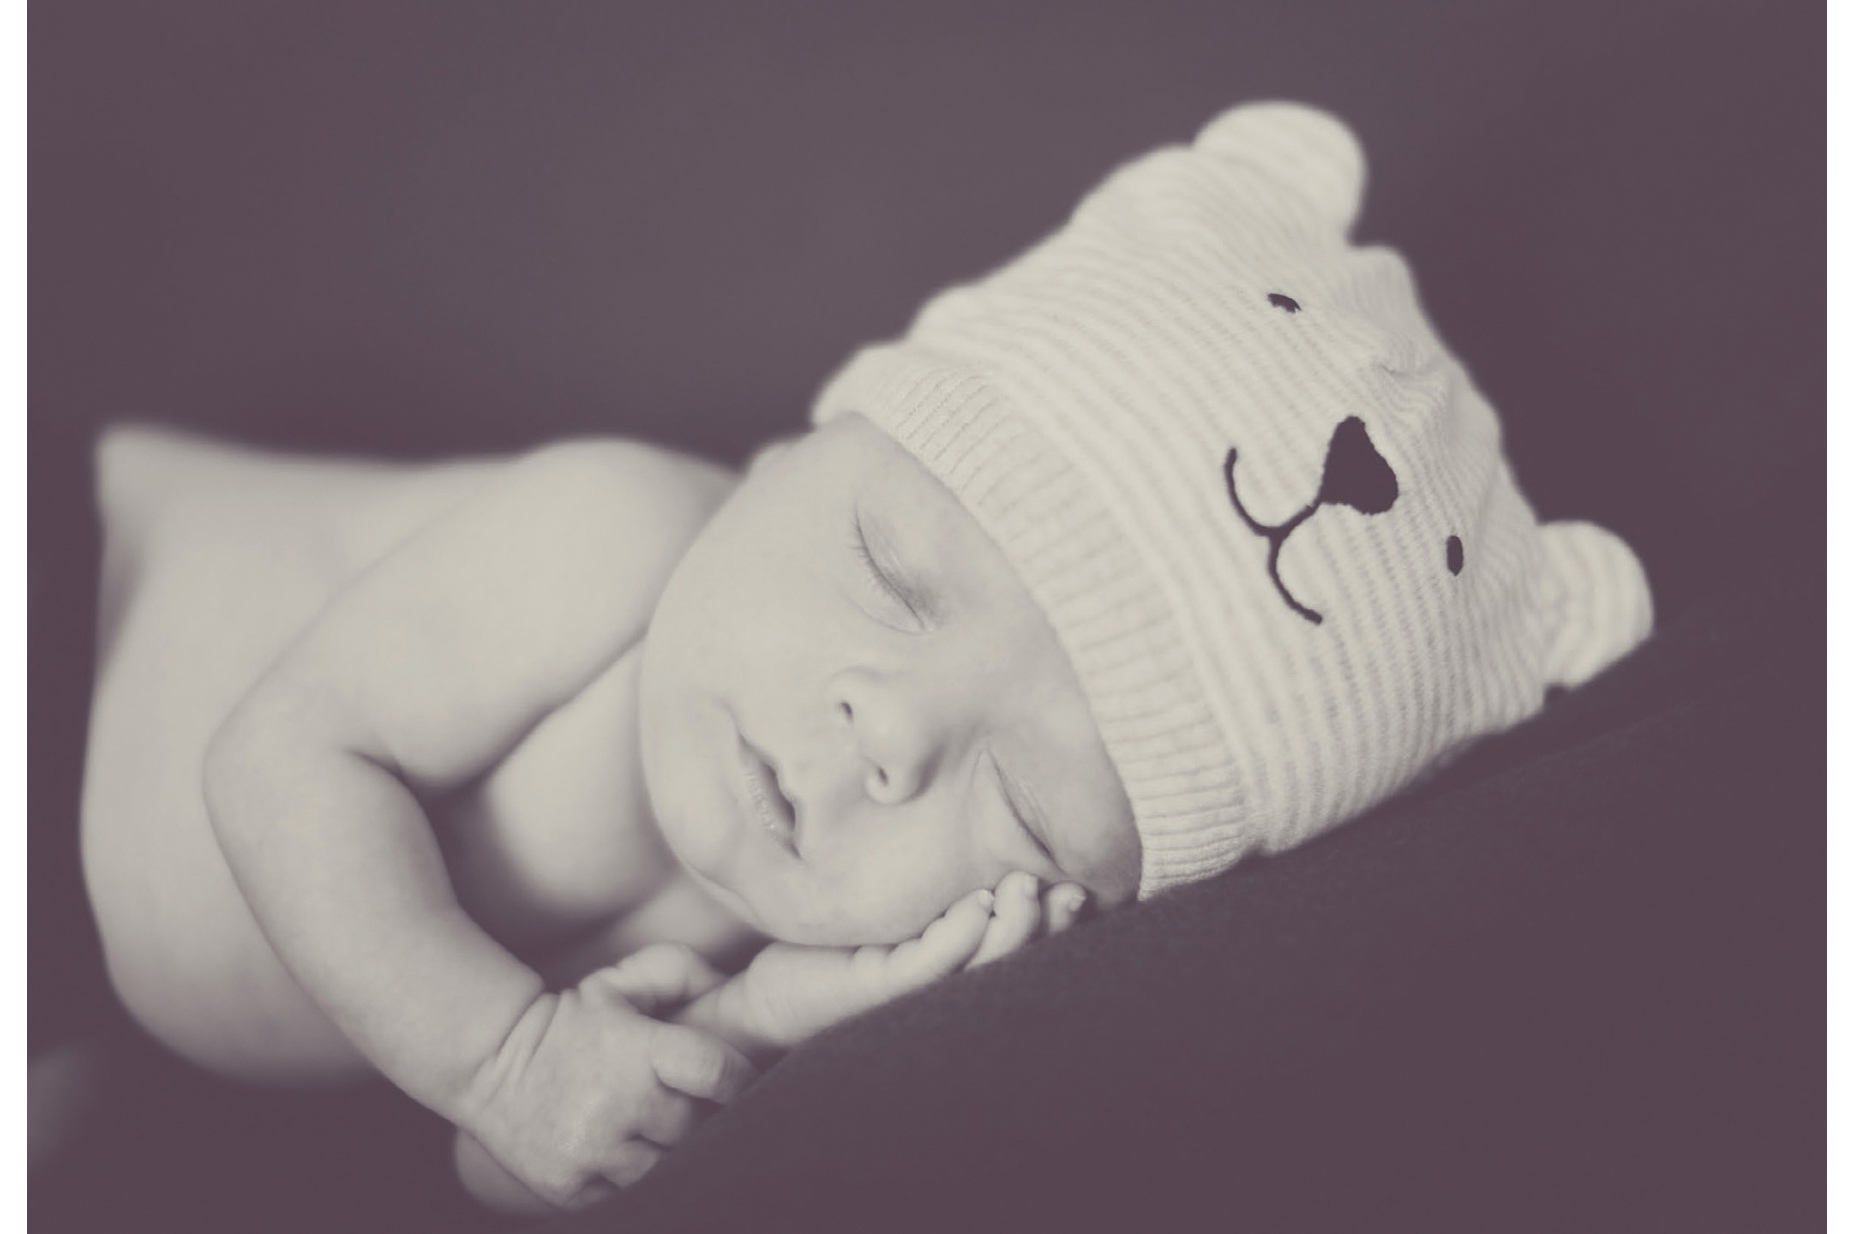 Images by Jenica Knight Photography Words cannot express the joy of new life - photo 18